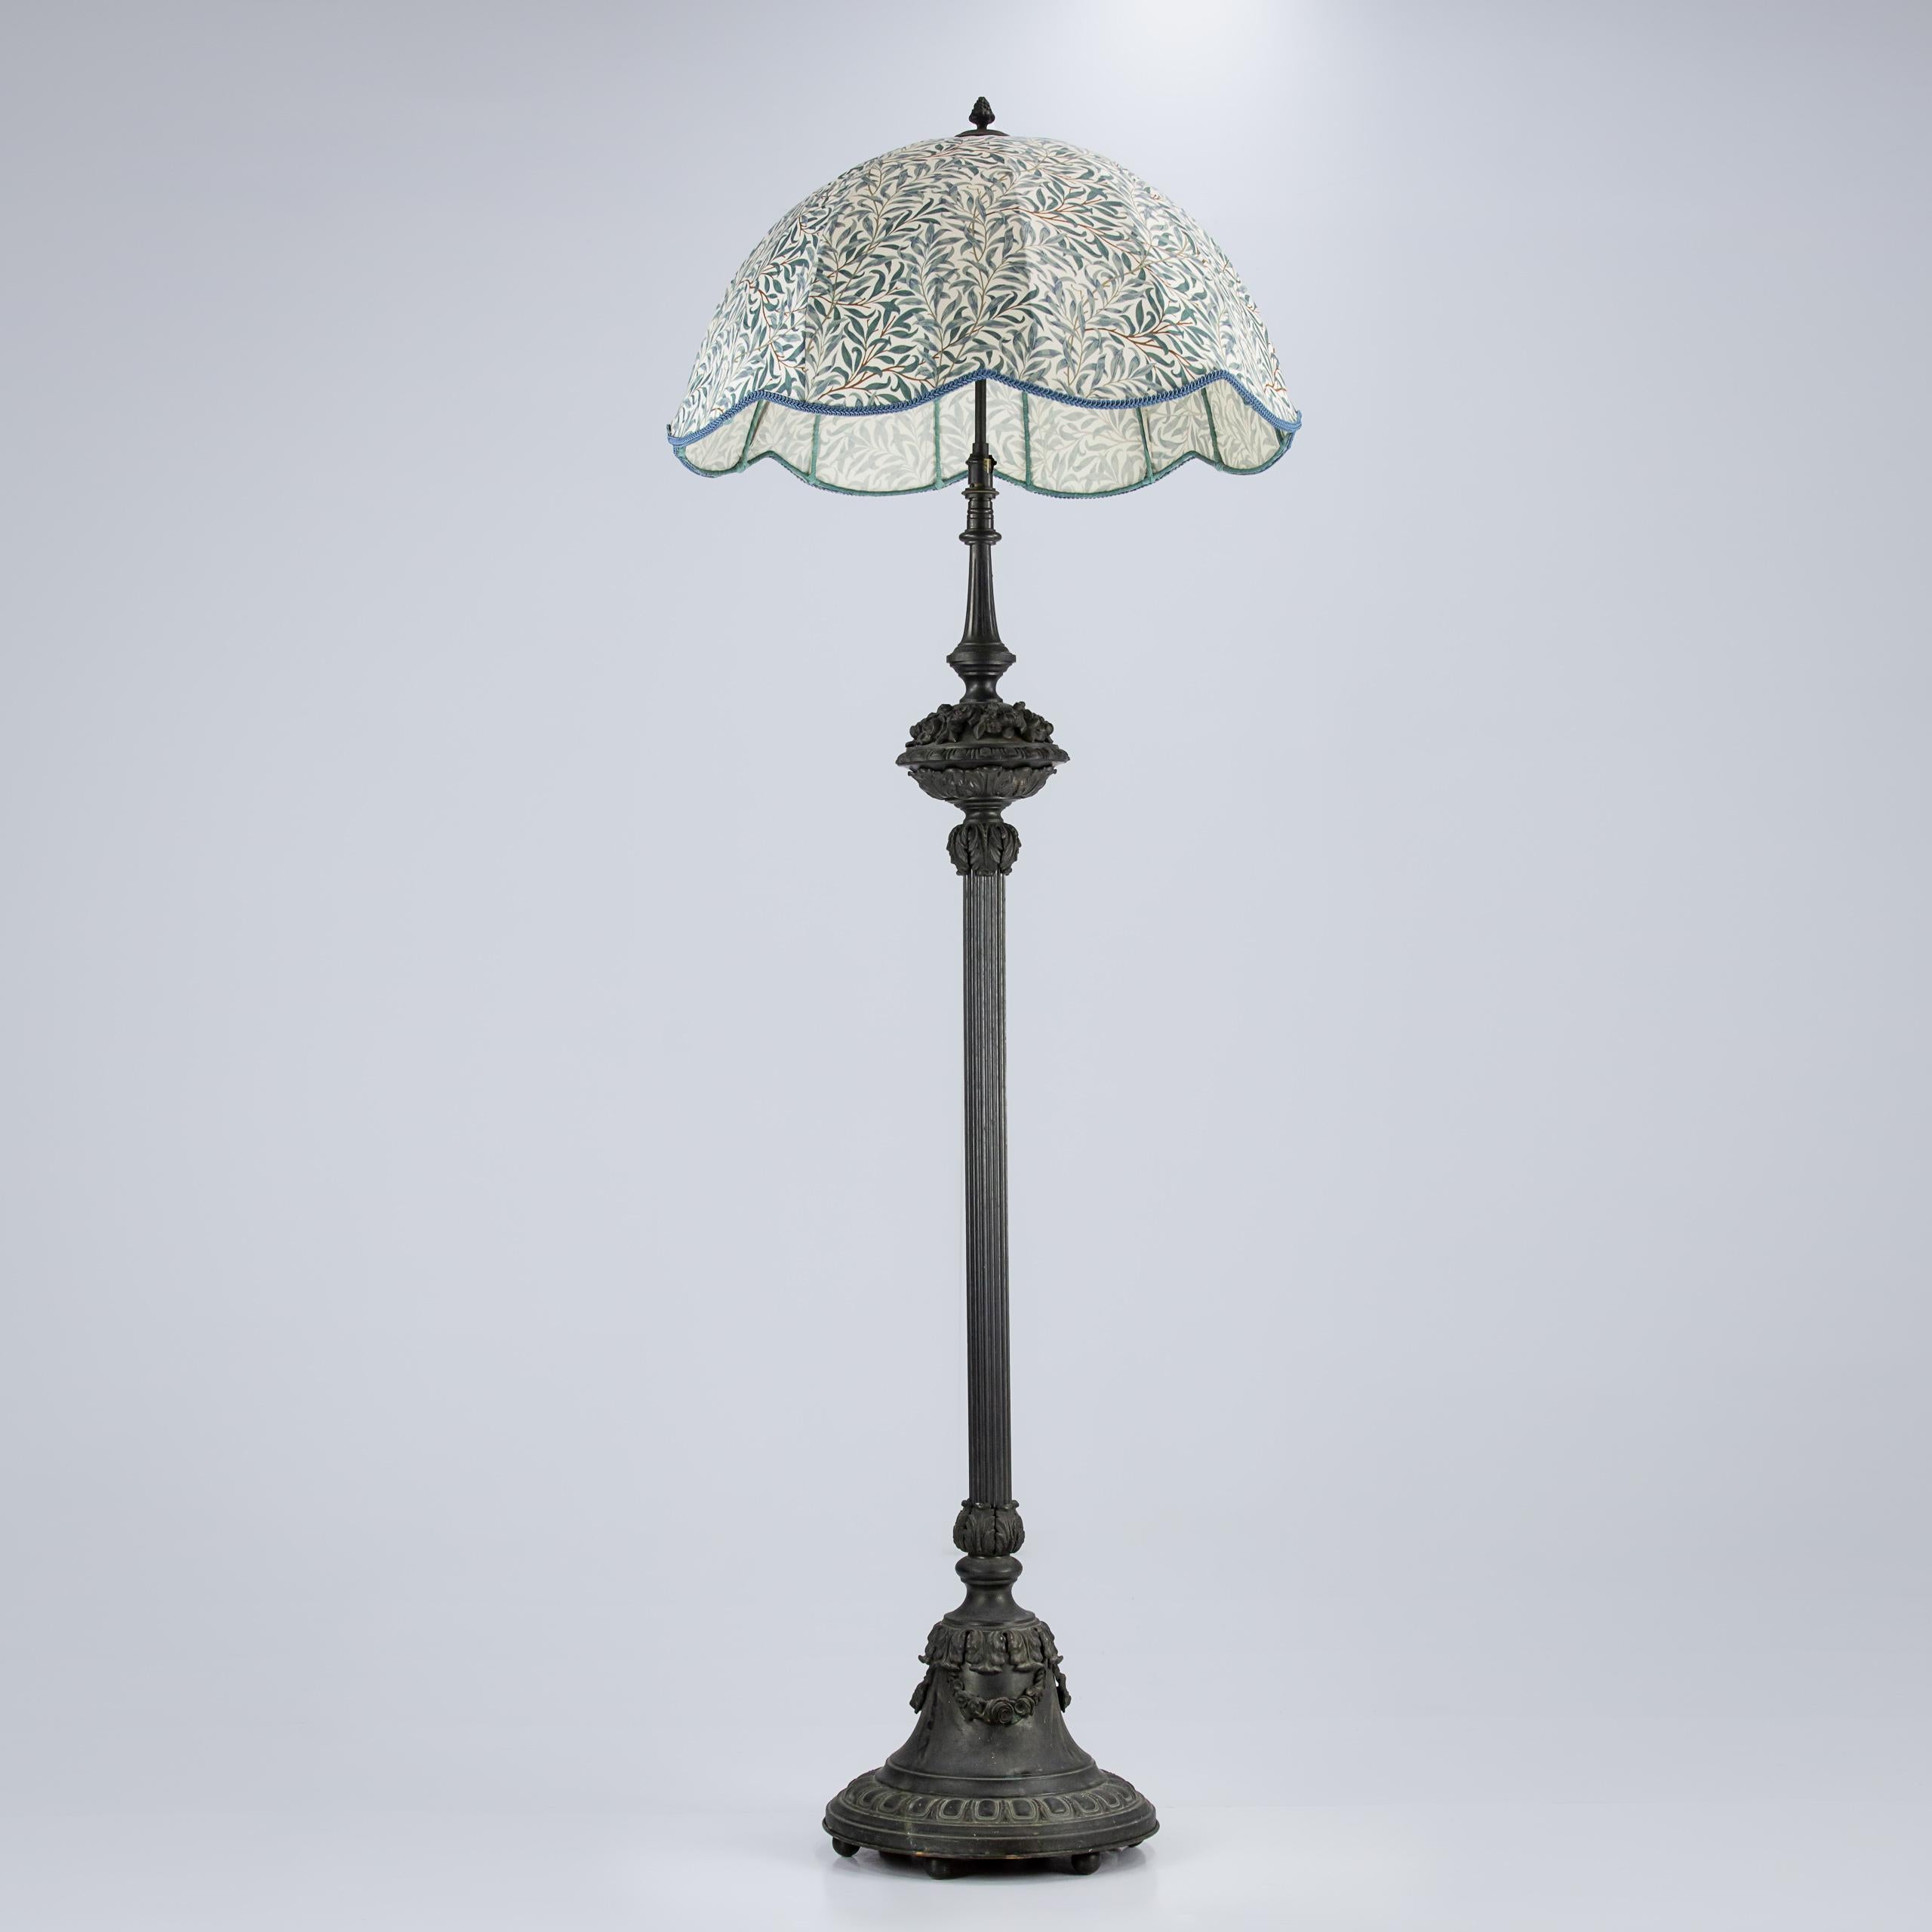 Impressive articulating bronze standard lamp with huge bespoke William Morris willow bough pattern lampshade.

Rewired in antique style flex, PAT tested.

France 1860. Heavy.